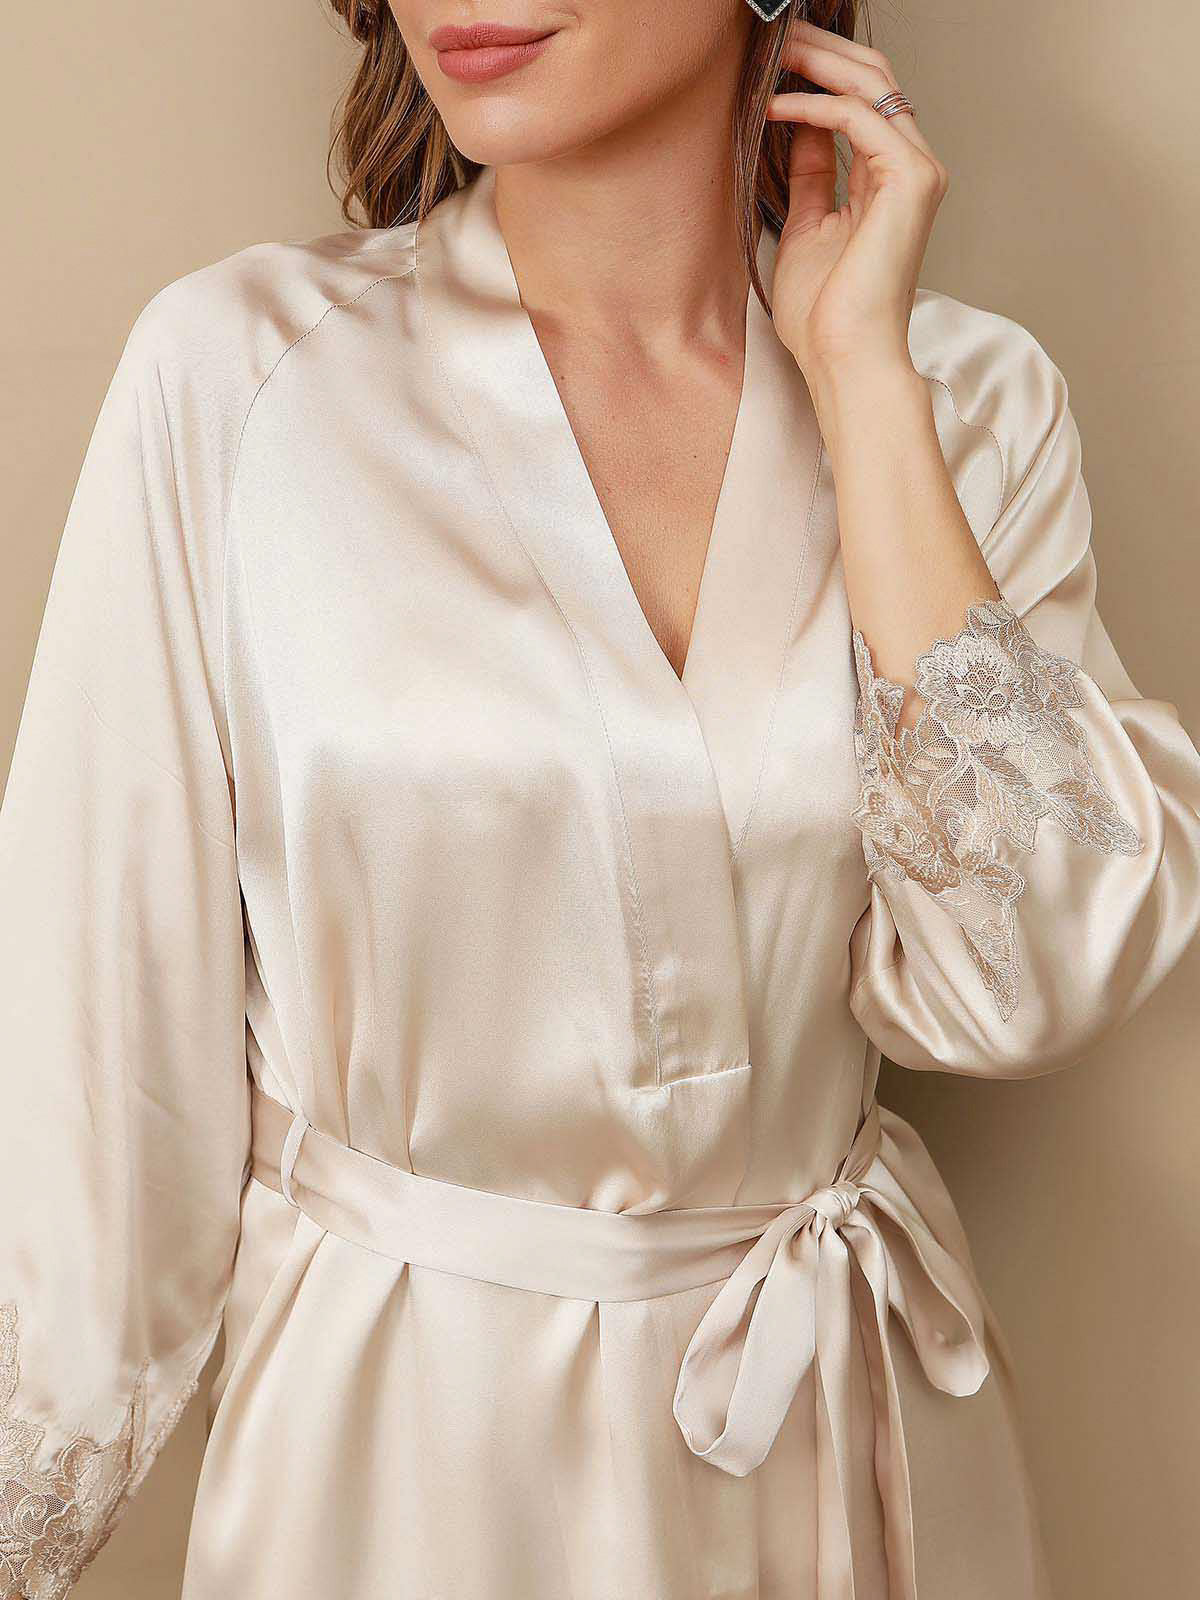 Fur Nighty & Robe Nightgown set - Private Lives